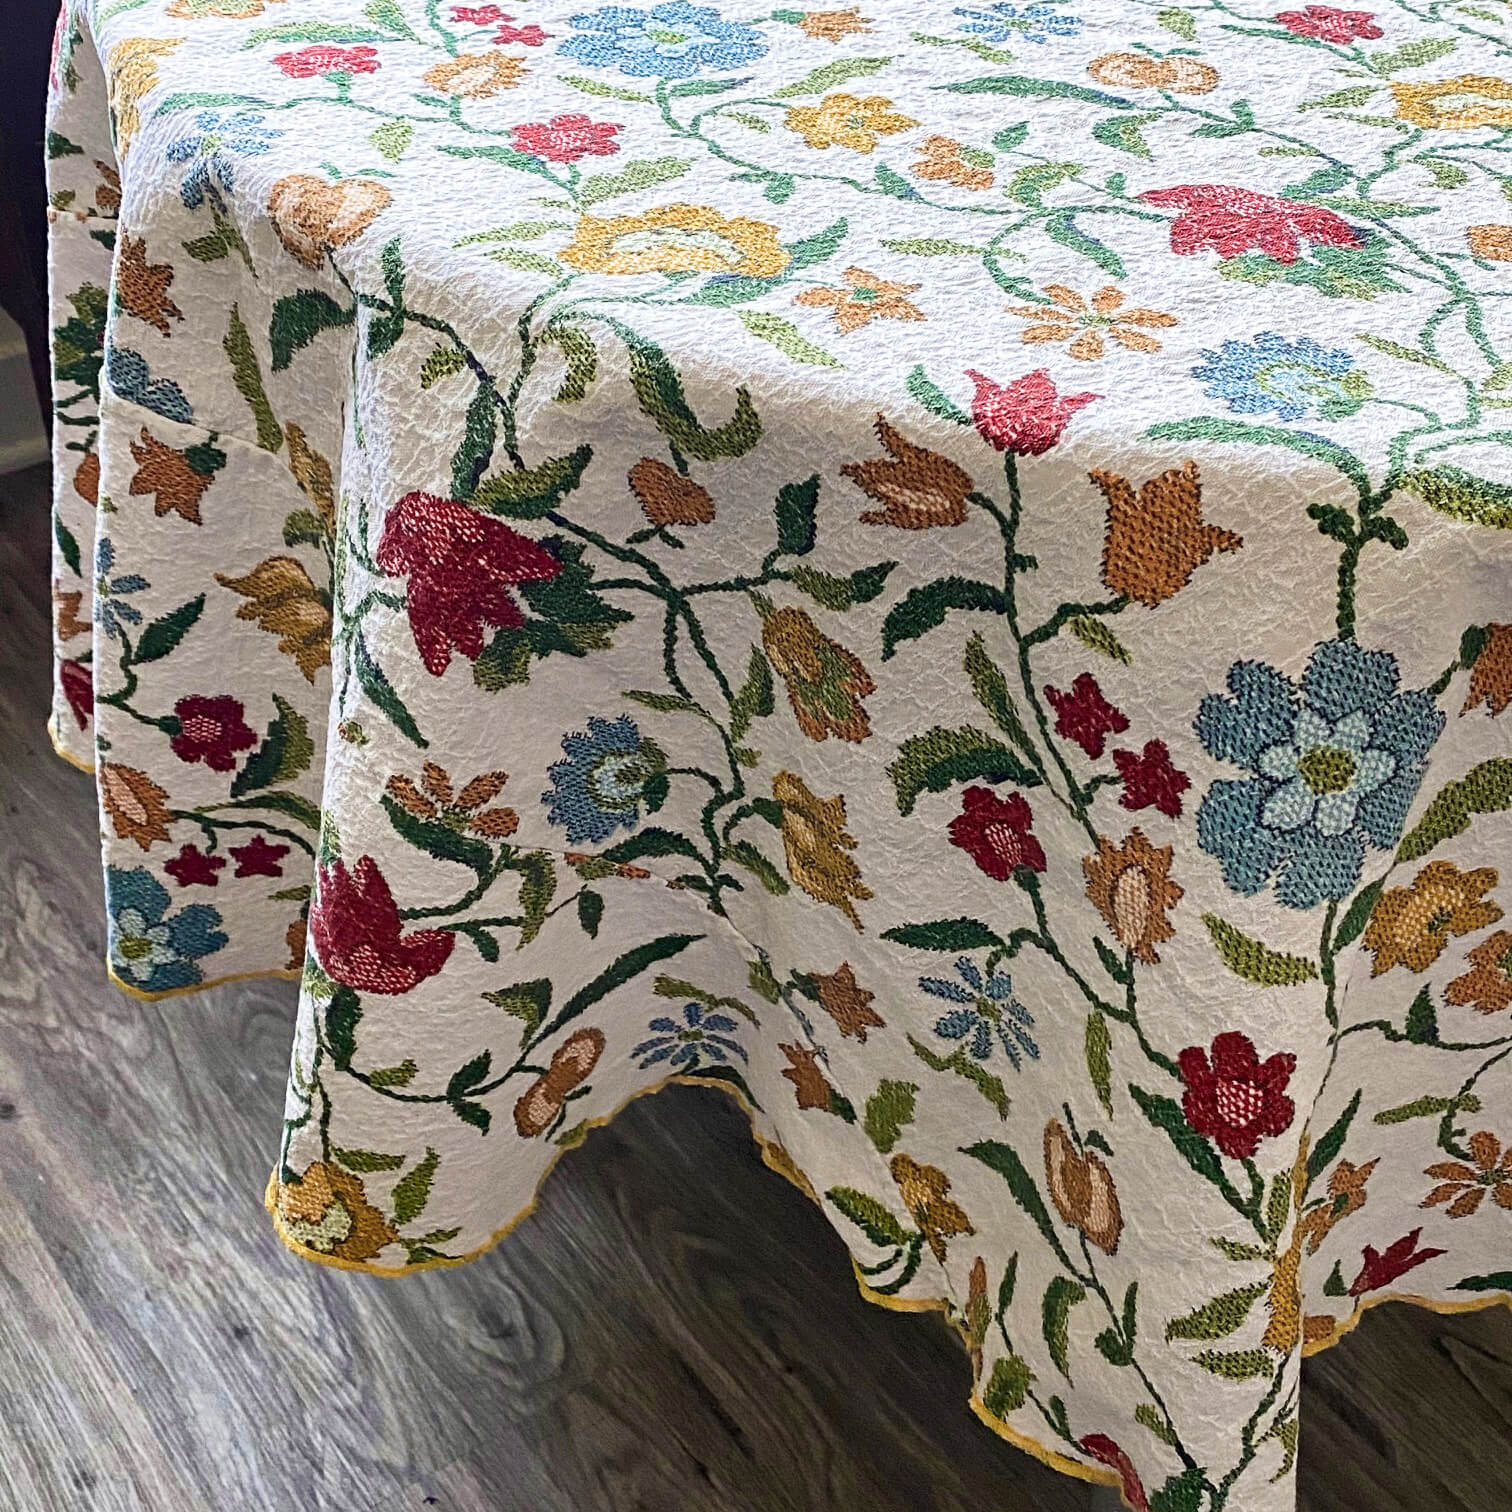 Vintage Round Floral Tablecloth Picnic Blanket - Red Blue Yellow Flowers - 64" inches